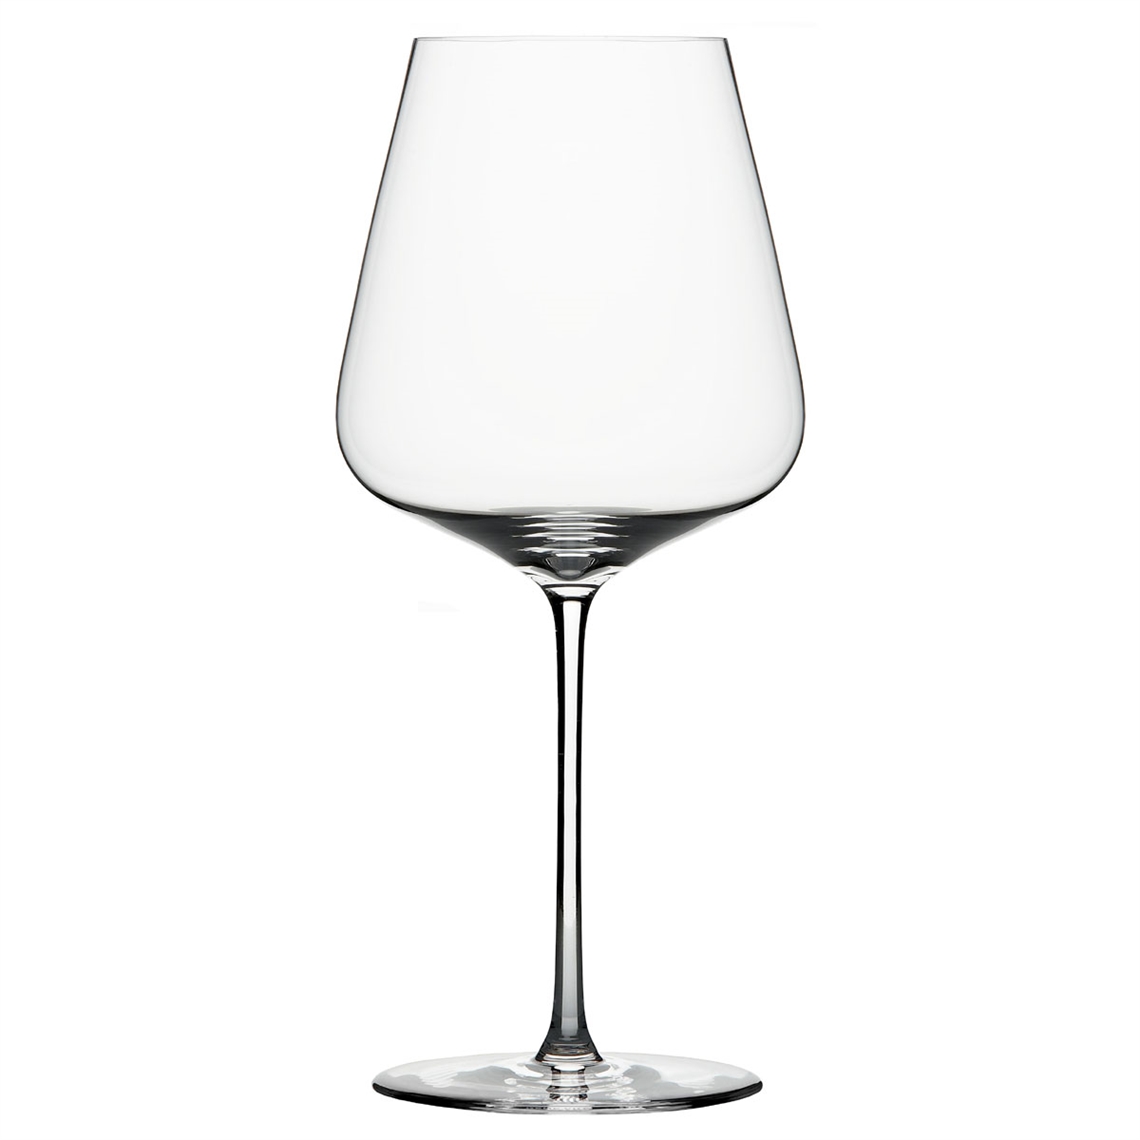 View more mondial from our Premium Mouth Blown Glassware range